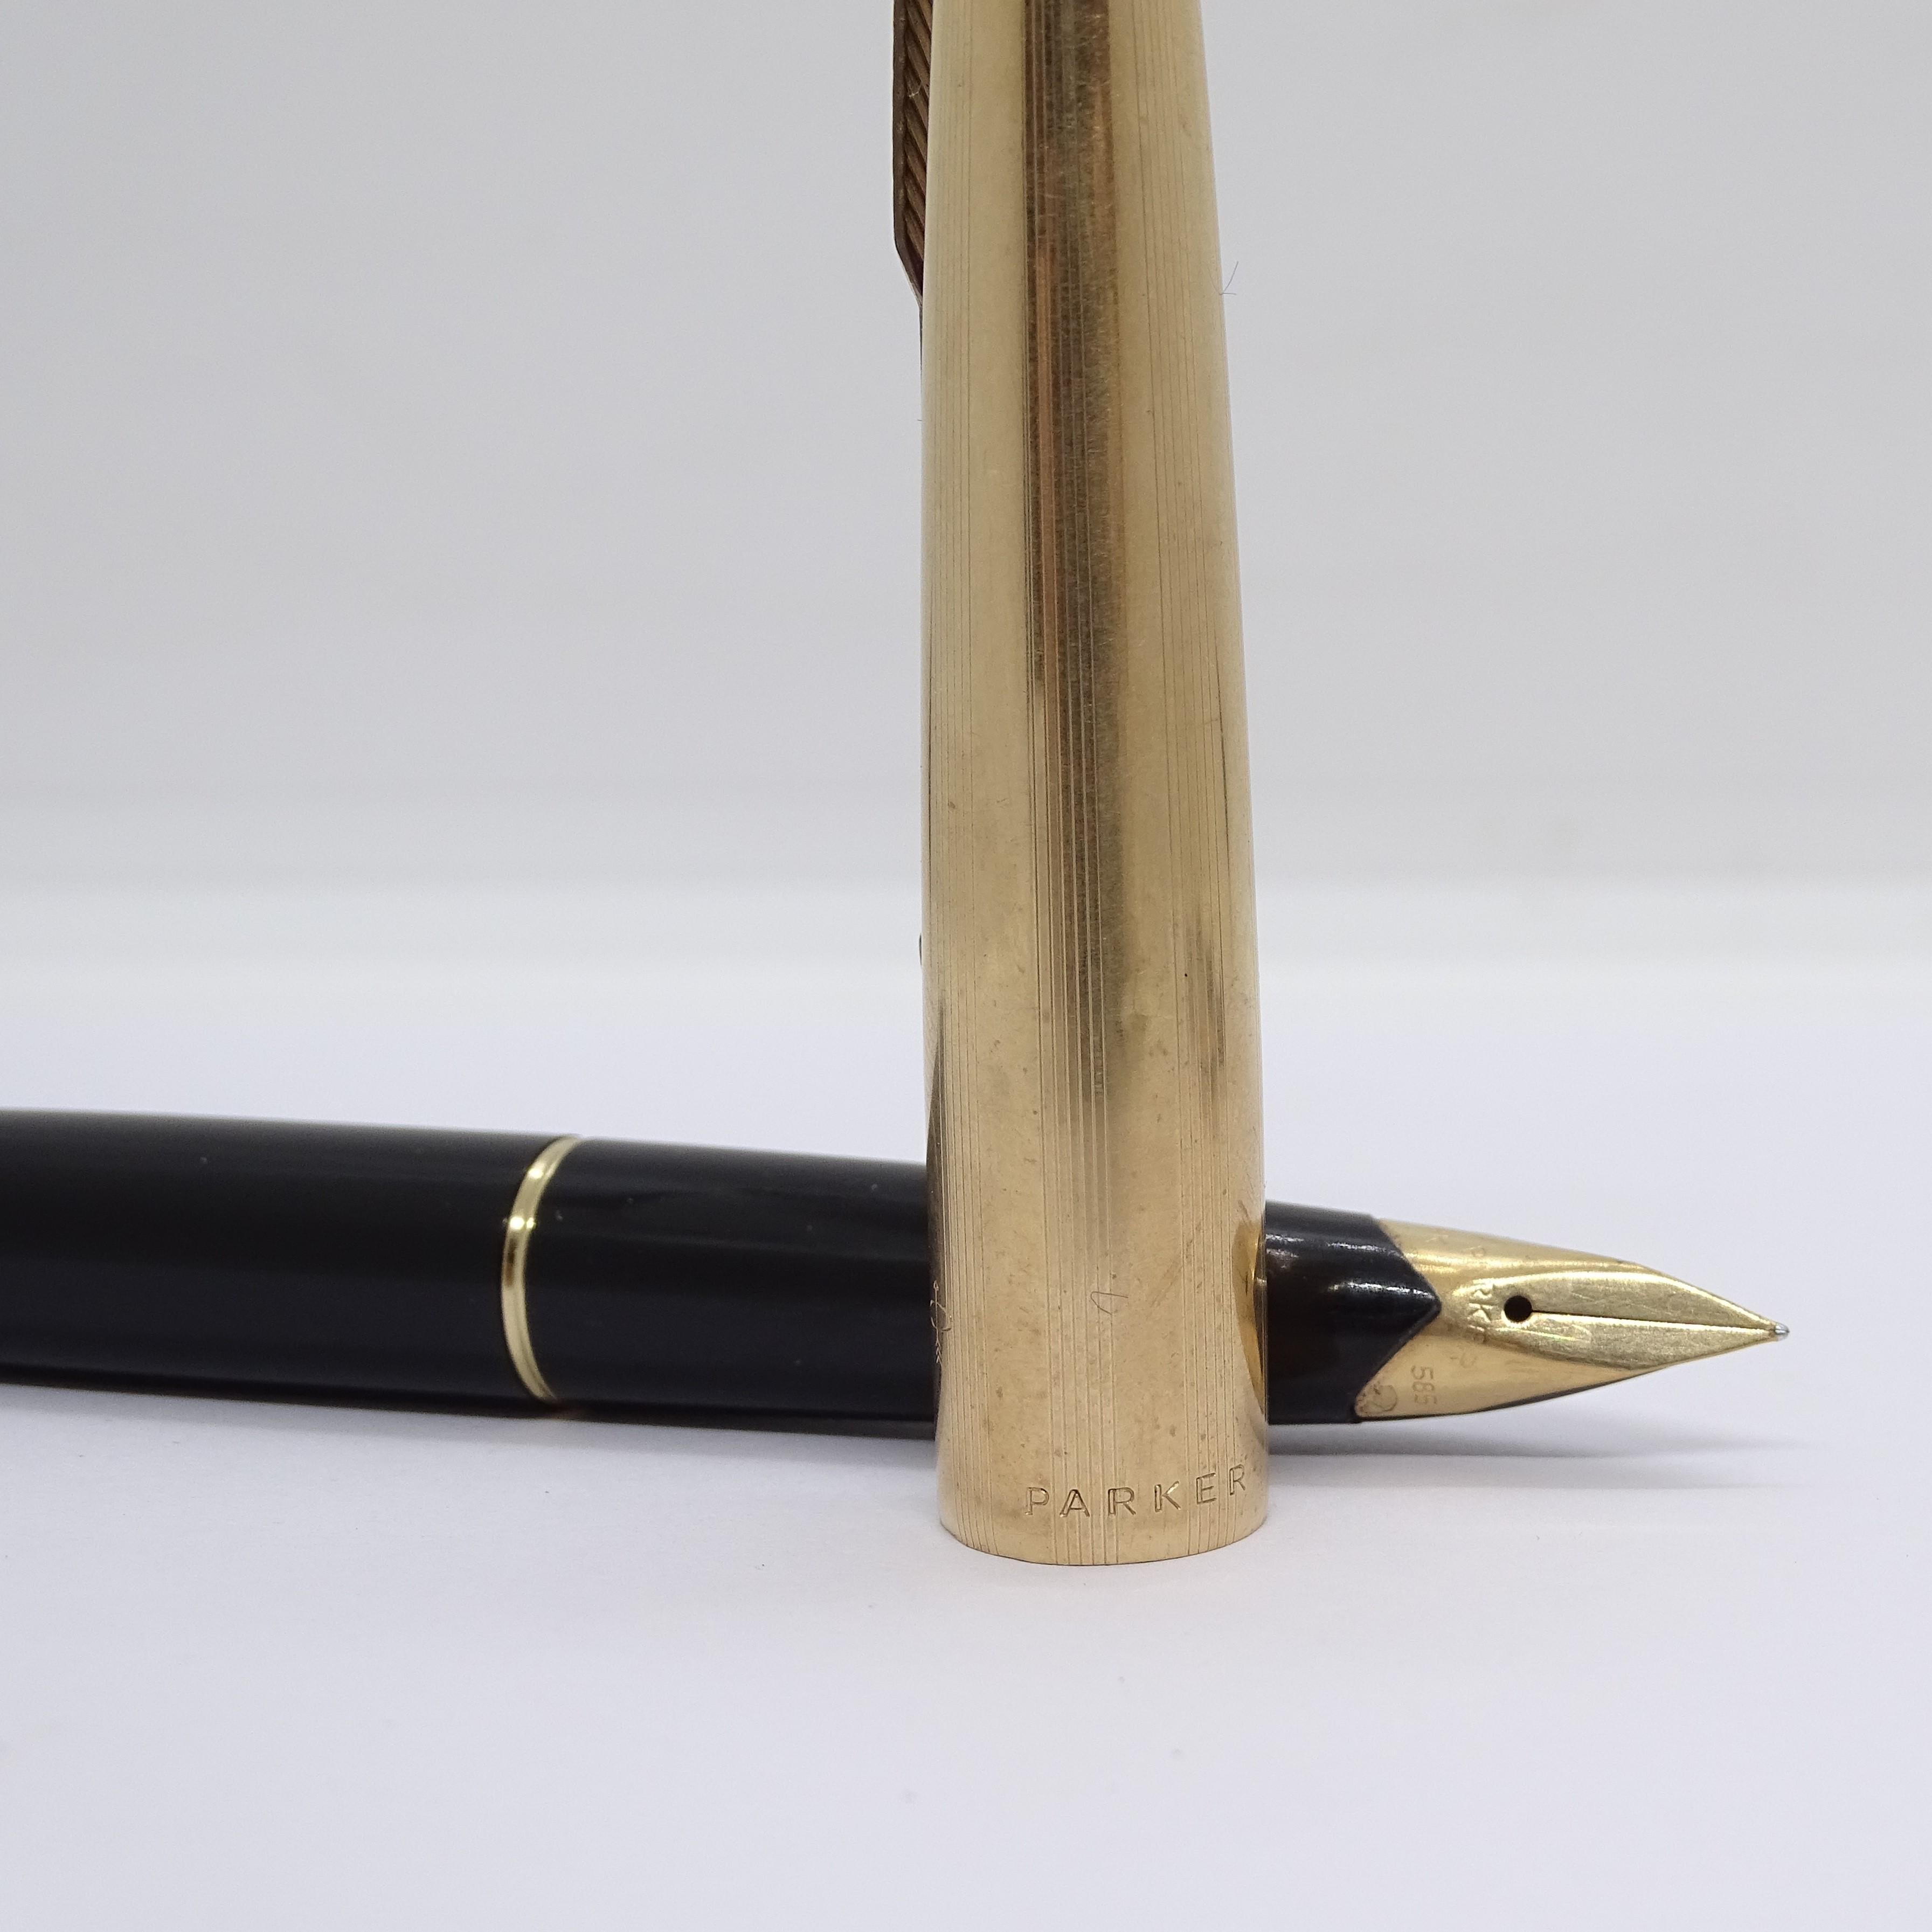 Parker 65 Custom Black writing set with case, 14k gold plated, 70's For Sale 5